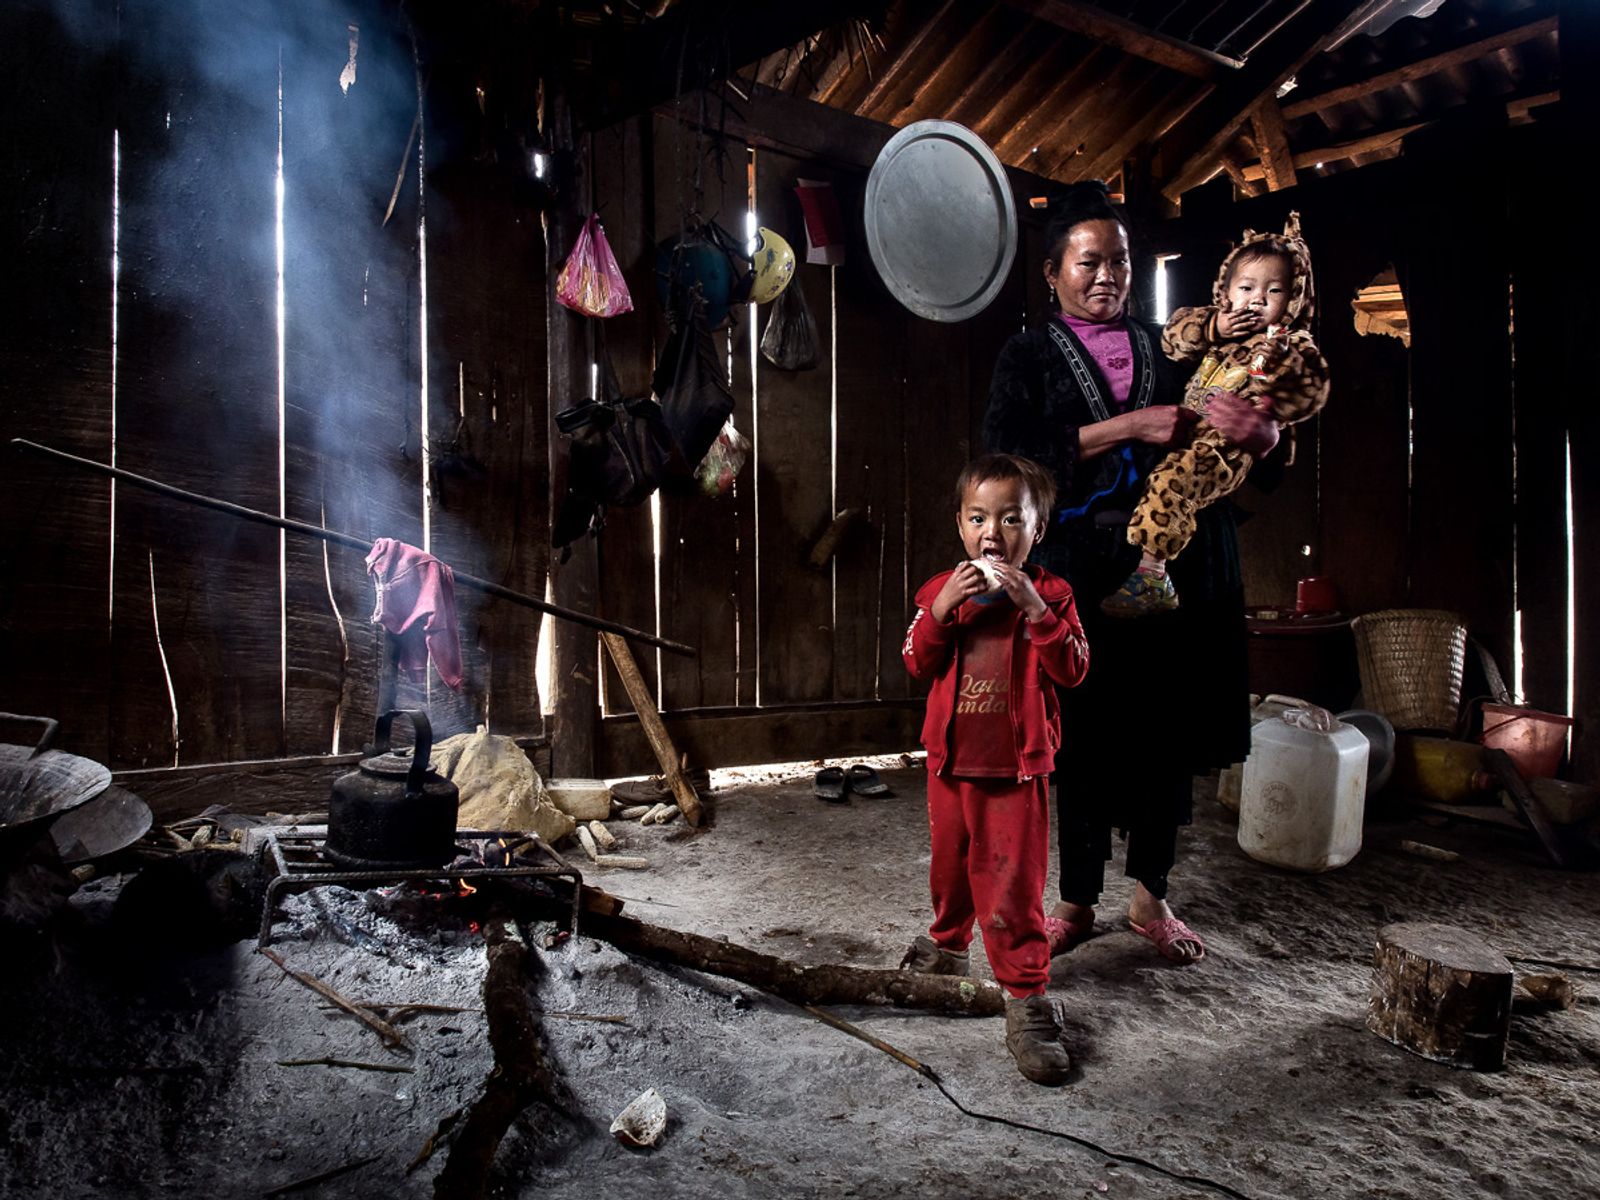 © Tony Corocher - Image from the PORTRAITS OF STRENGTH: Ethnic Women in North Vietnam photography project